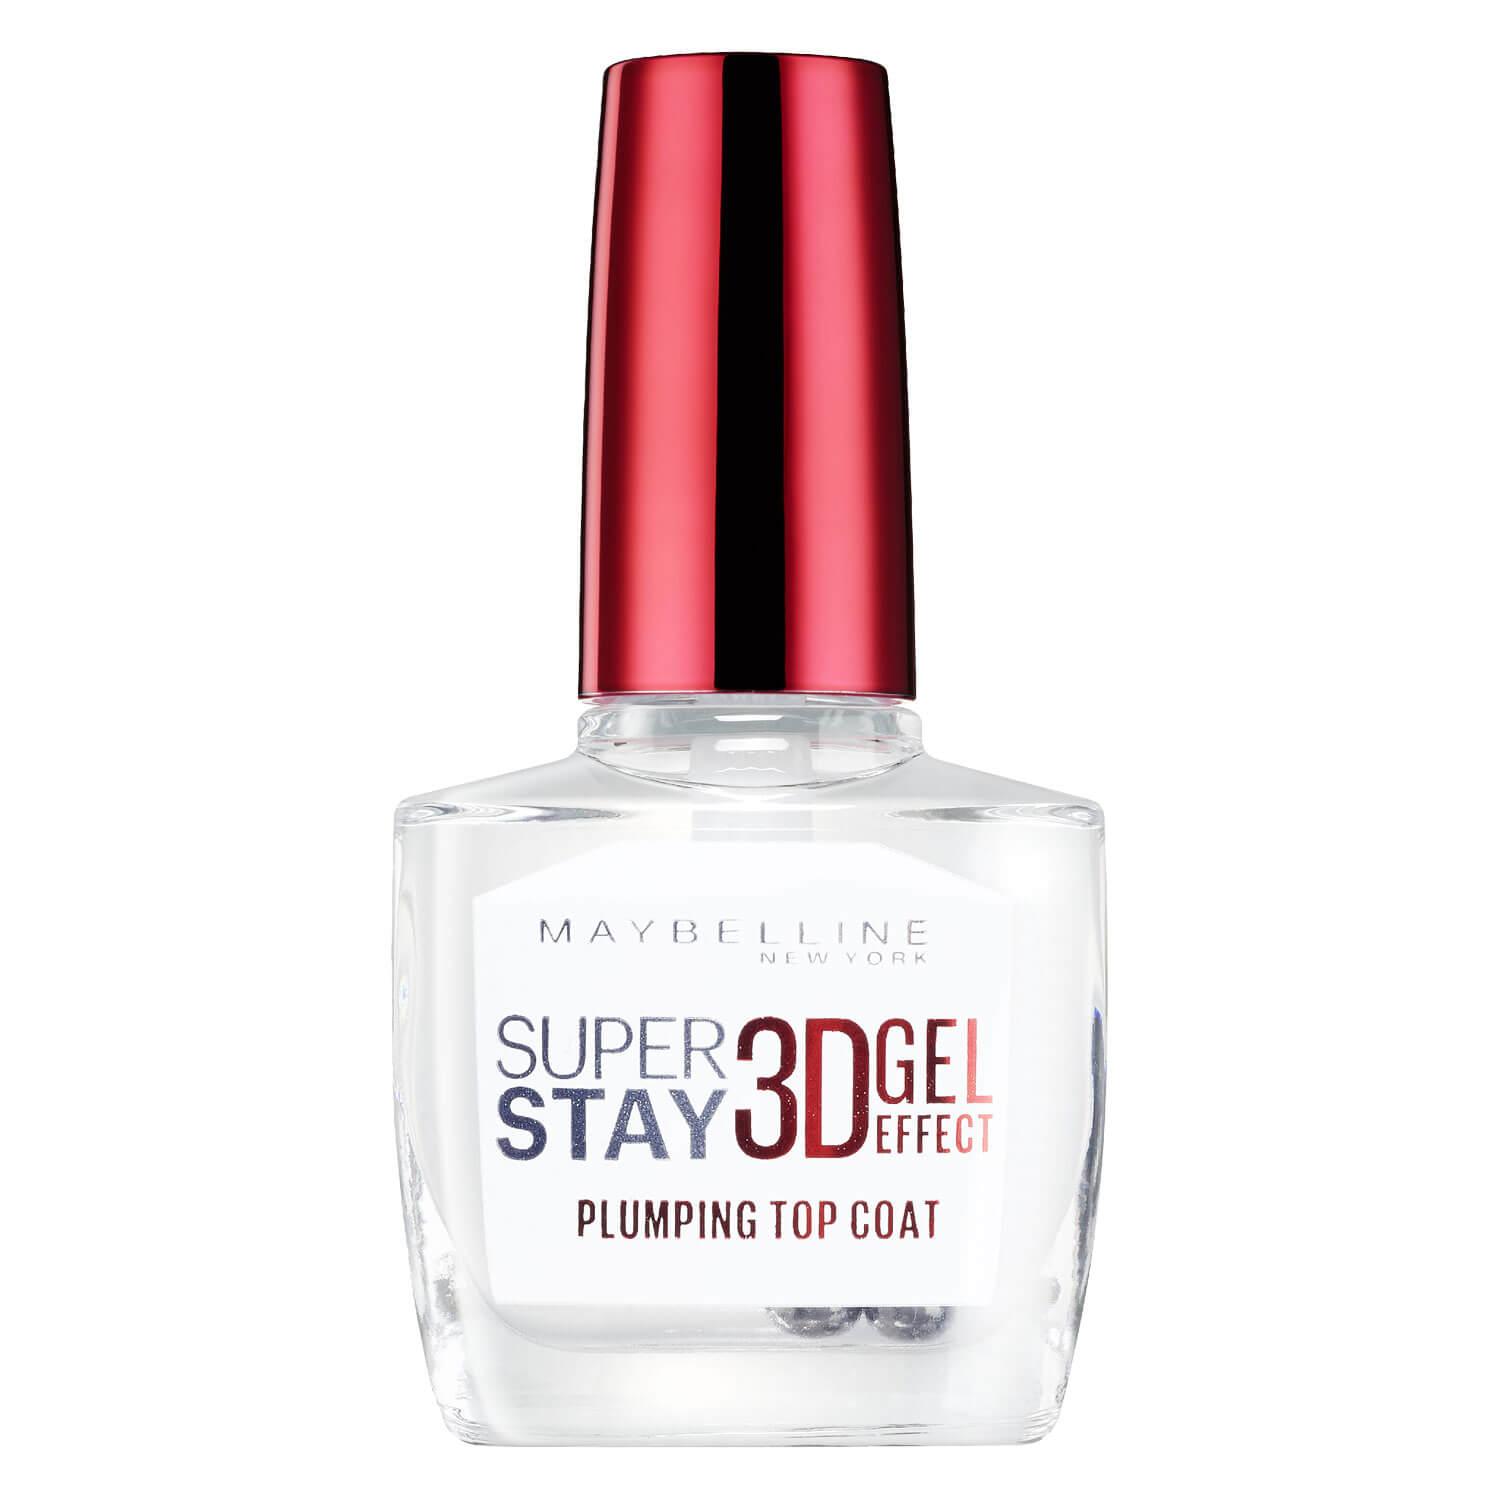 Maybelline NY Nails - Vernis à Ongles Super Stay 7 Days 3D Gel Top Coat